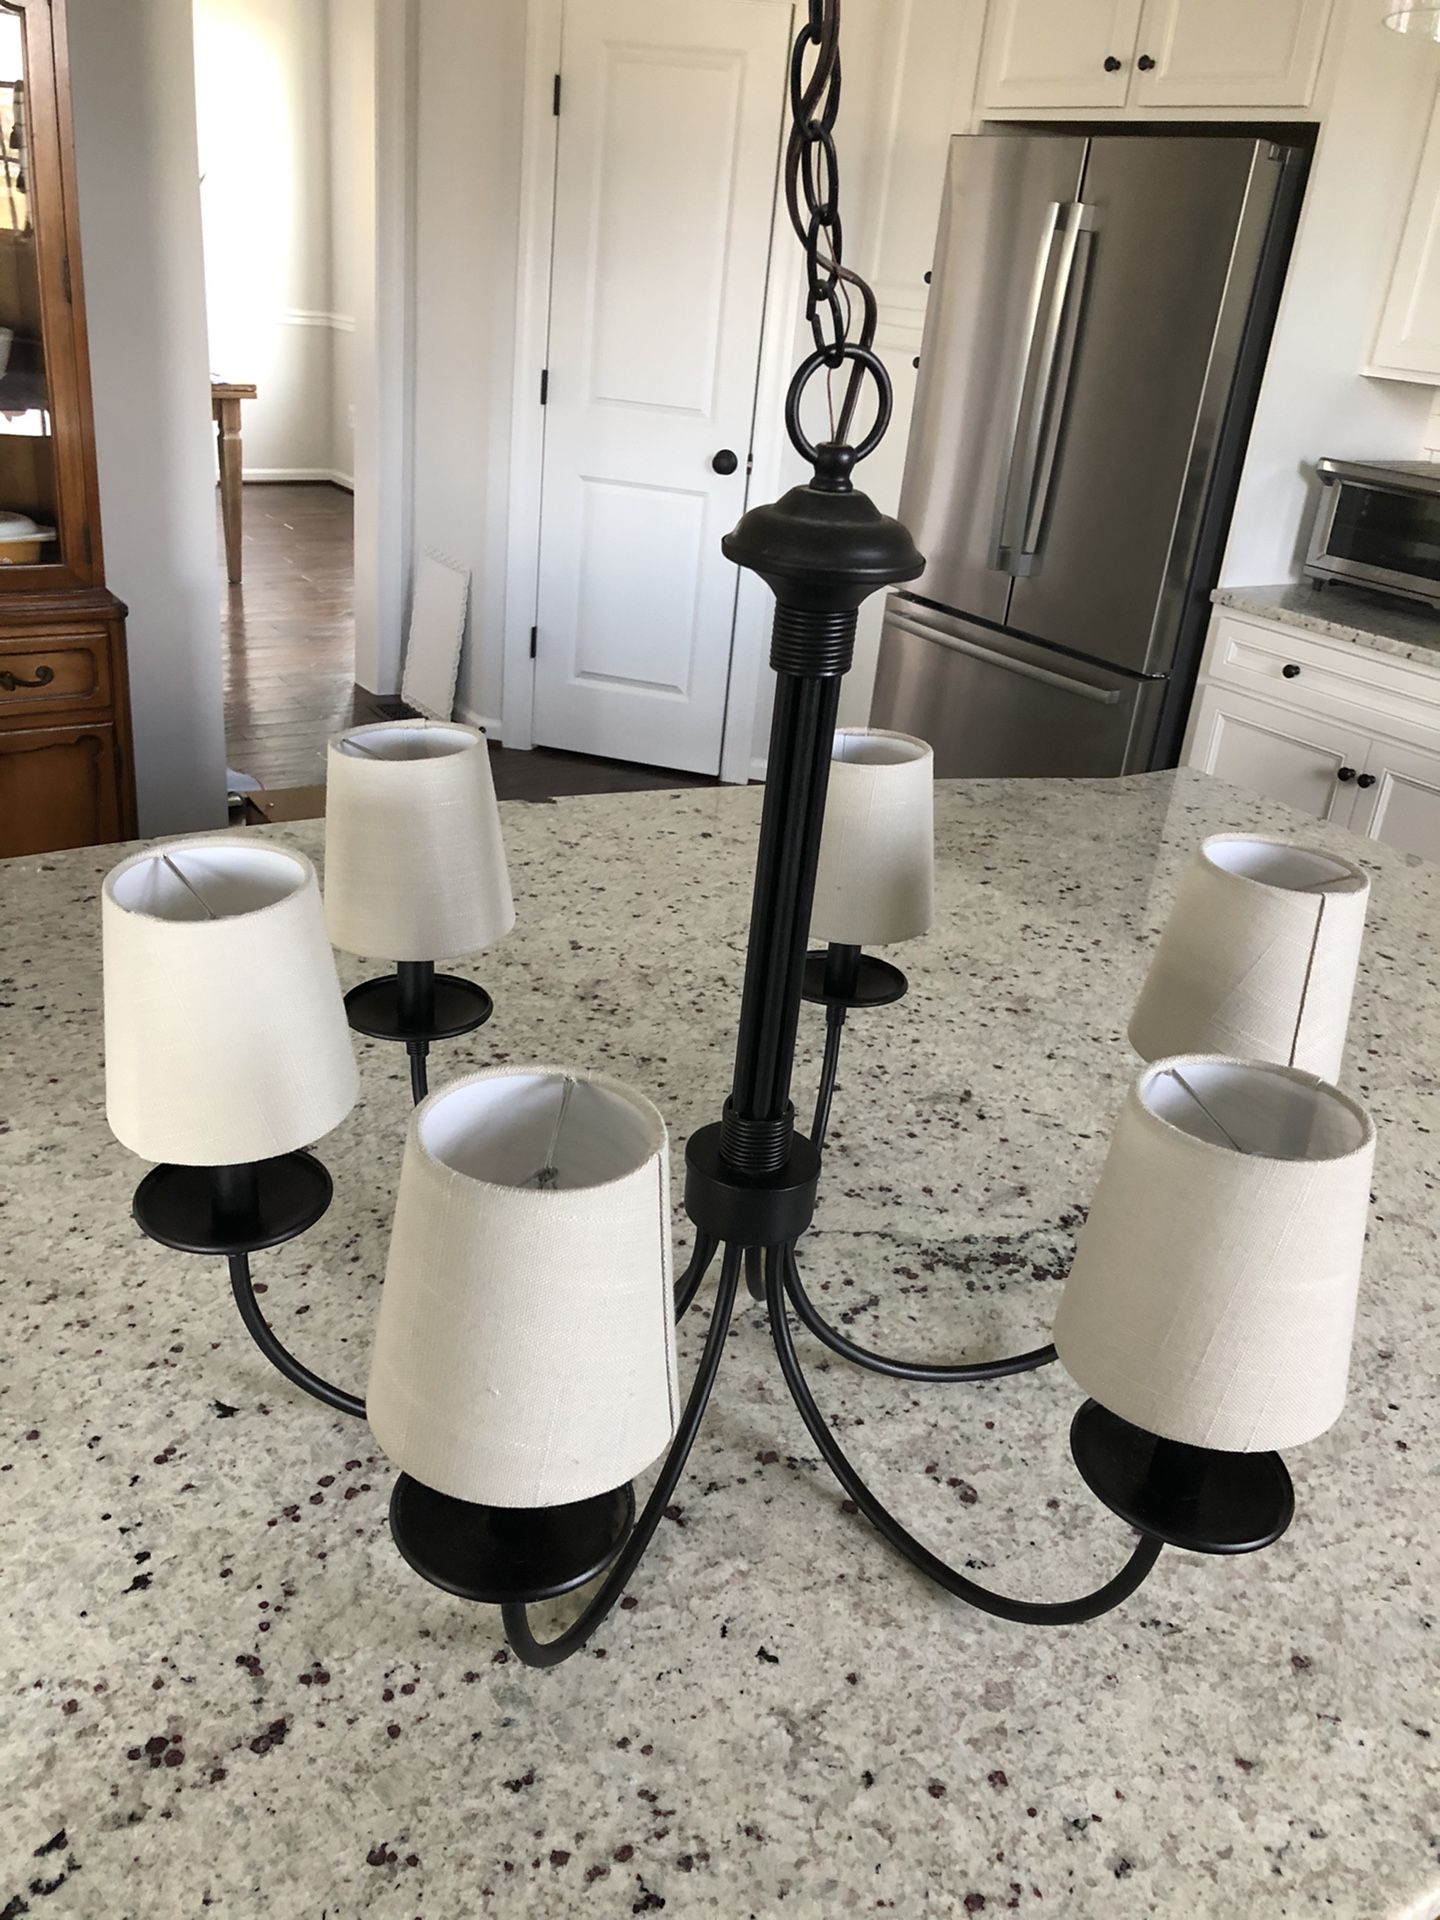 Chandelier light fixture - shades and LED bulbs included